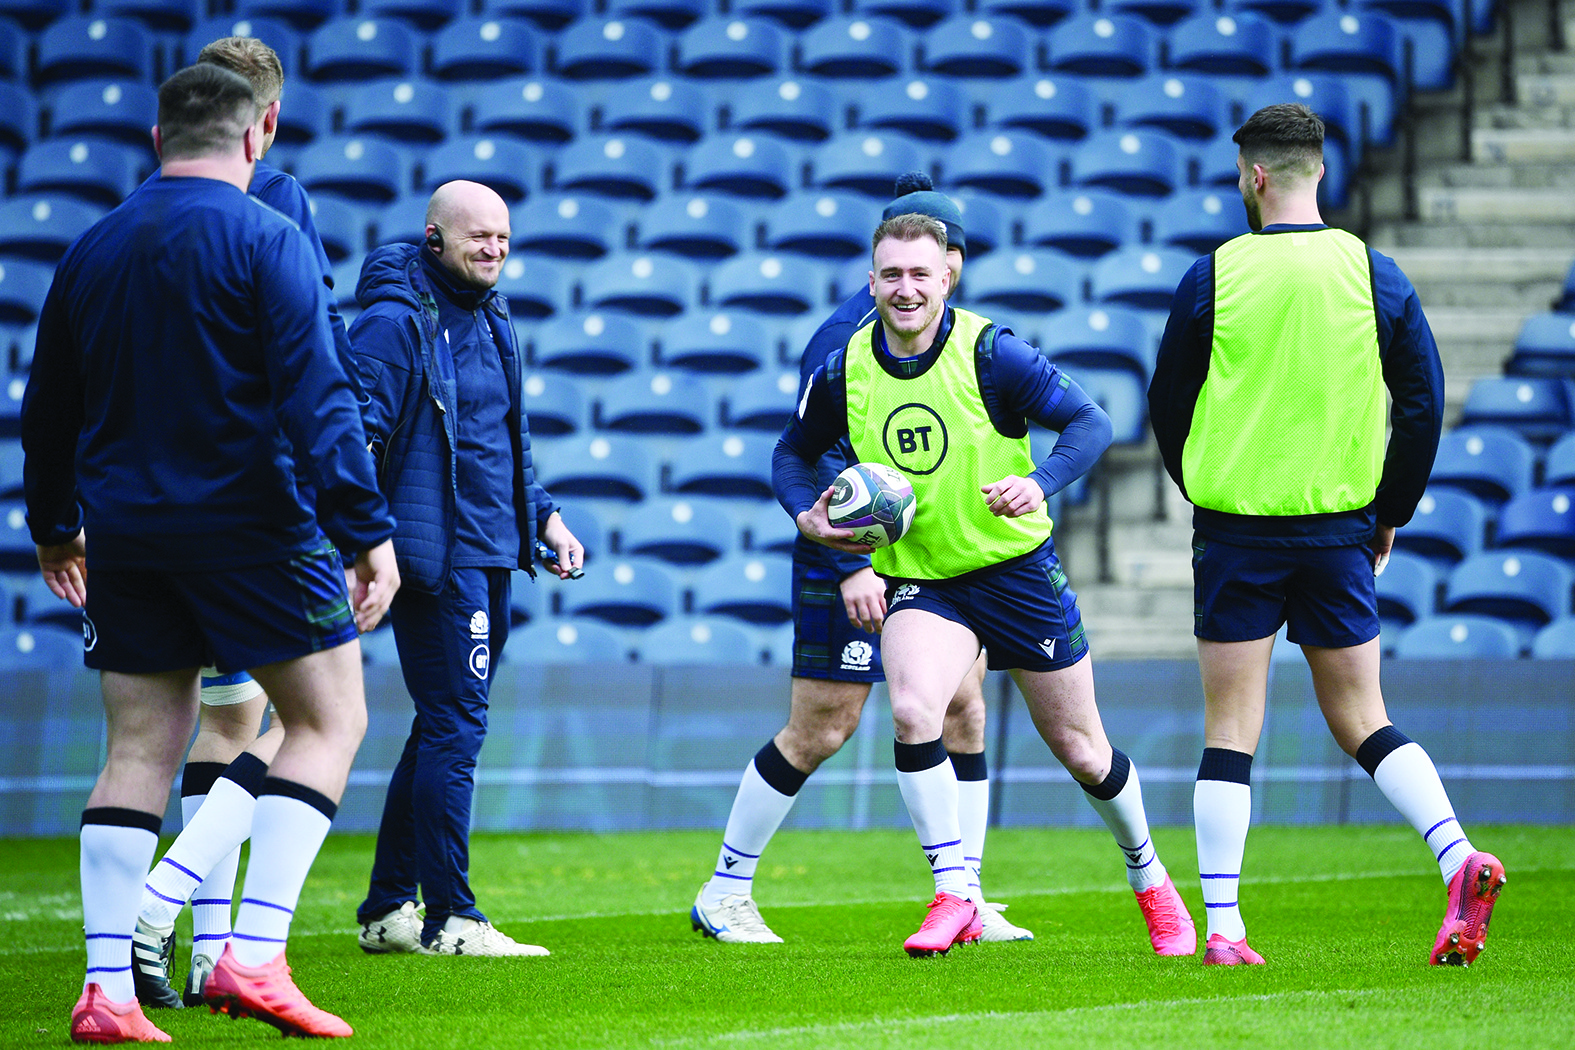 Scotland head coach Gregor Townsend (2L) and players participate in the Captain's Run training session at Murrayfield Stadium in Edinburgh on March 07, 2020, the eve of the Six Nations rugby union match between Scotland and France. (Photo by Anne-Christine POUJOULAT / AFP)